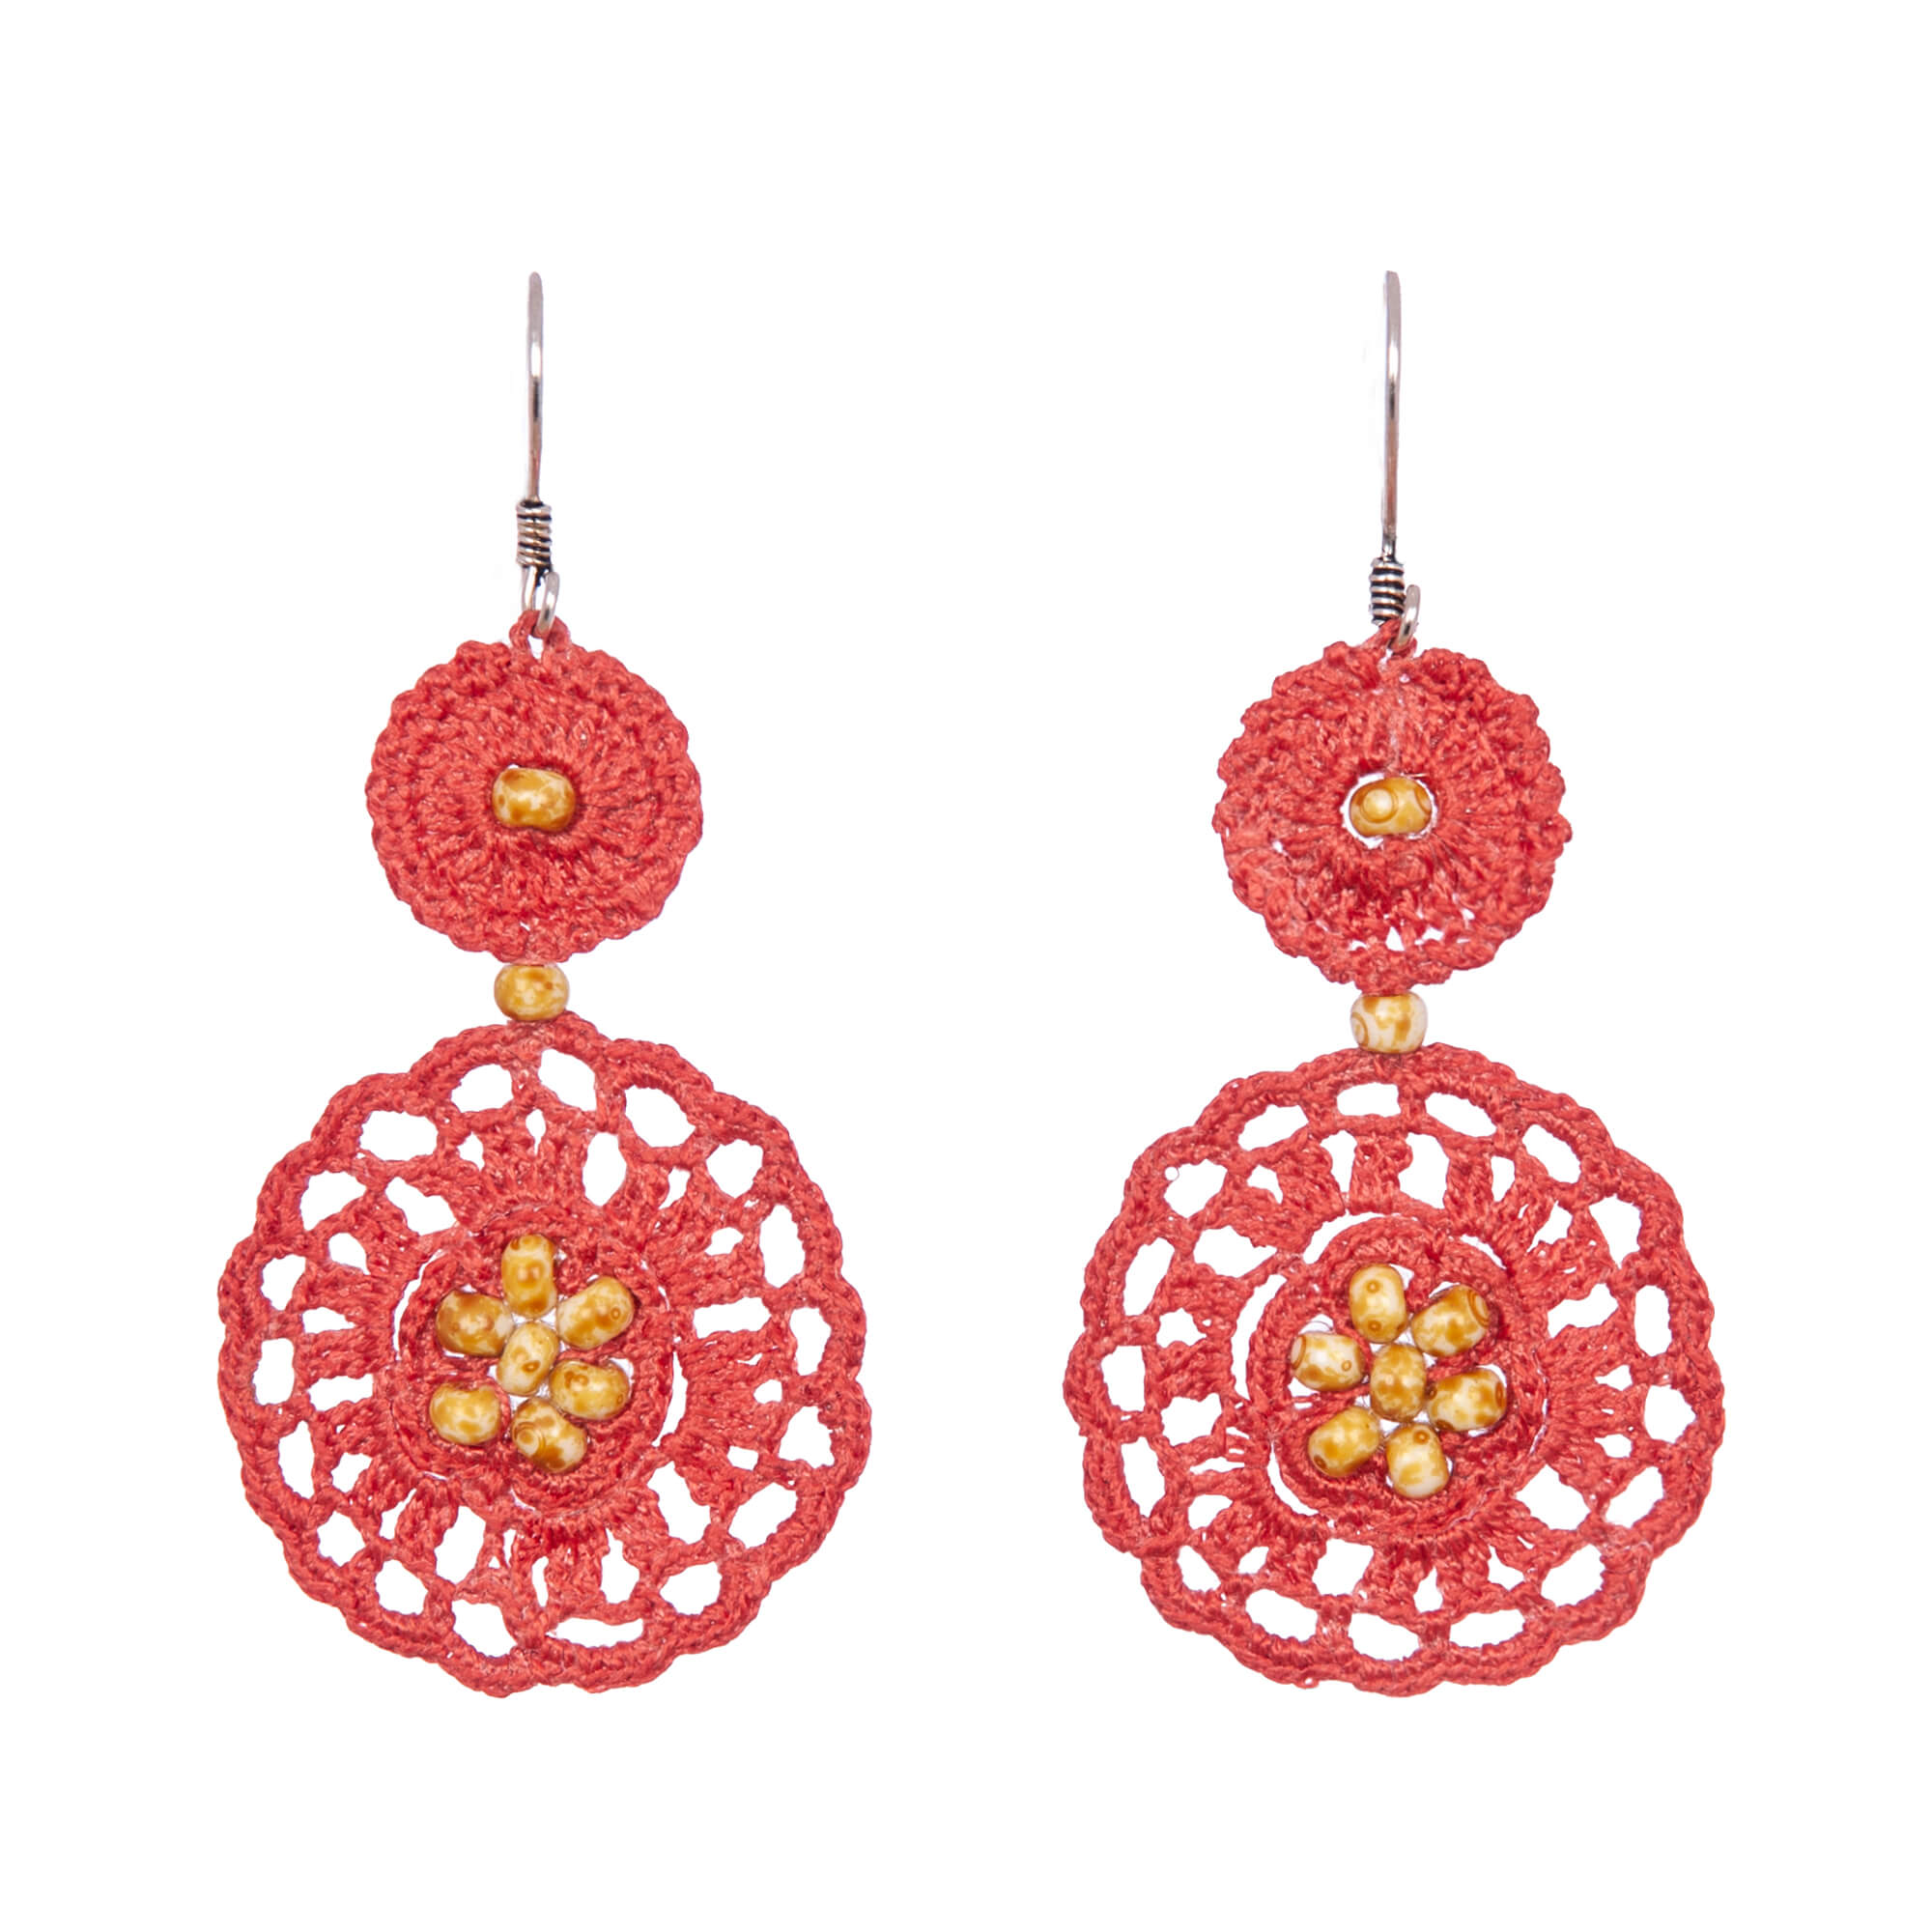 Unique Red Crochet and Beaded Earrings With Separate Round Parts